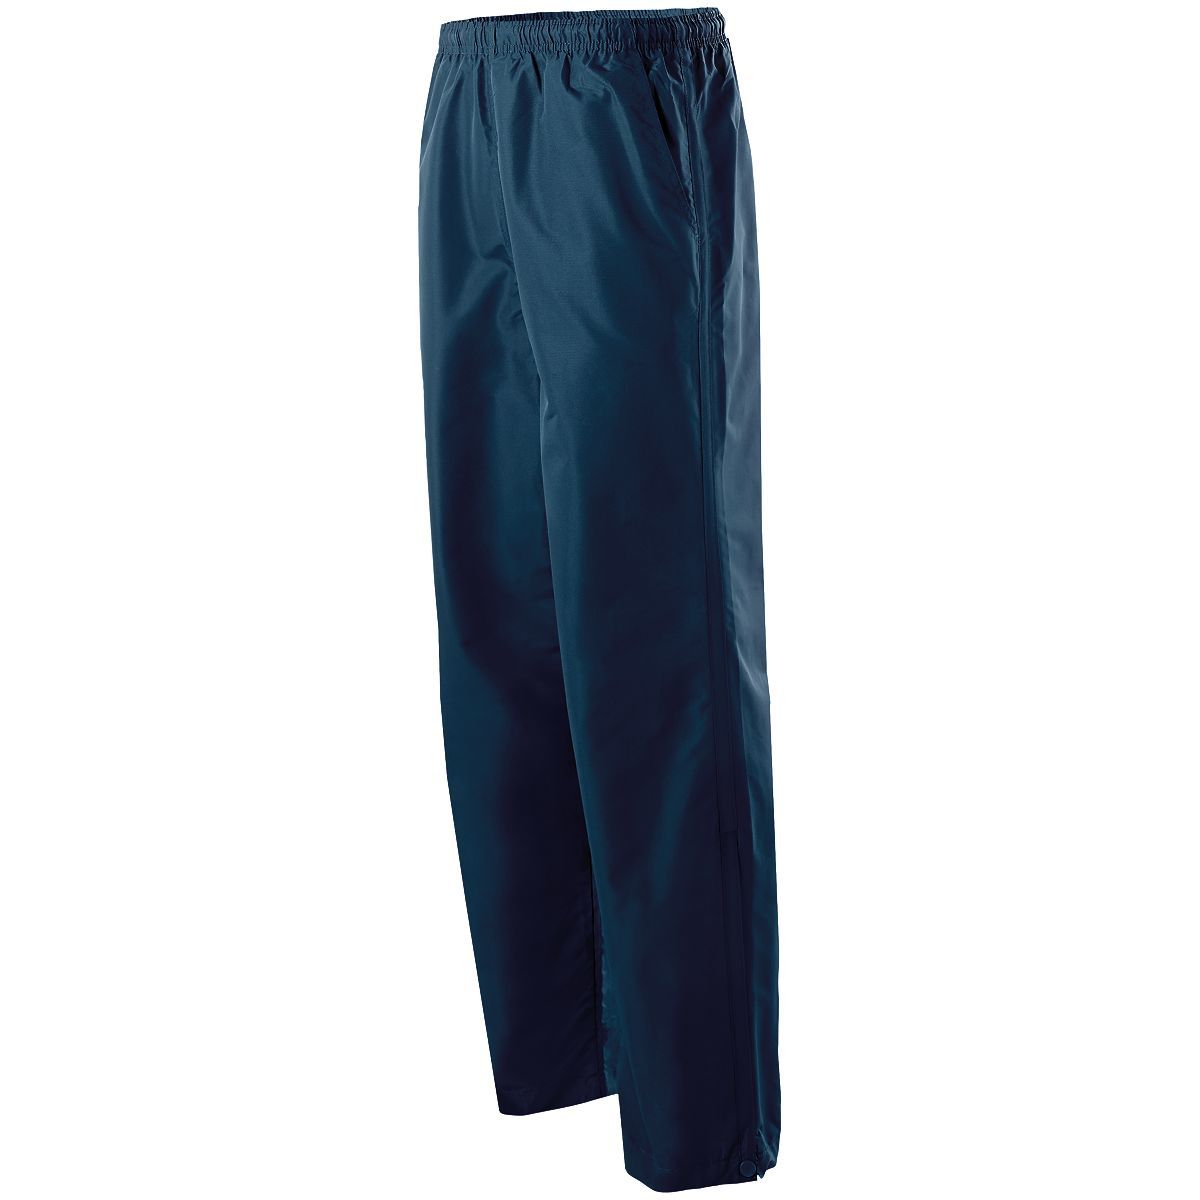 Holloway Pacer Pant in Navy  -Part of the Adult, Adult-Pants, Pants, Holloway product lines at KanaleyCreations.com